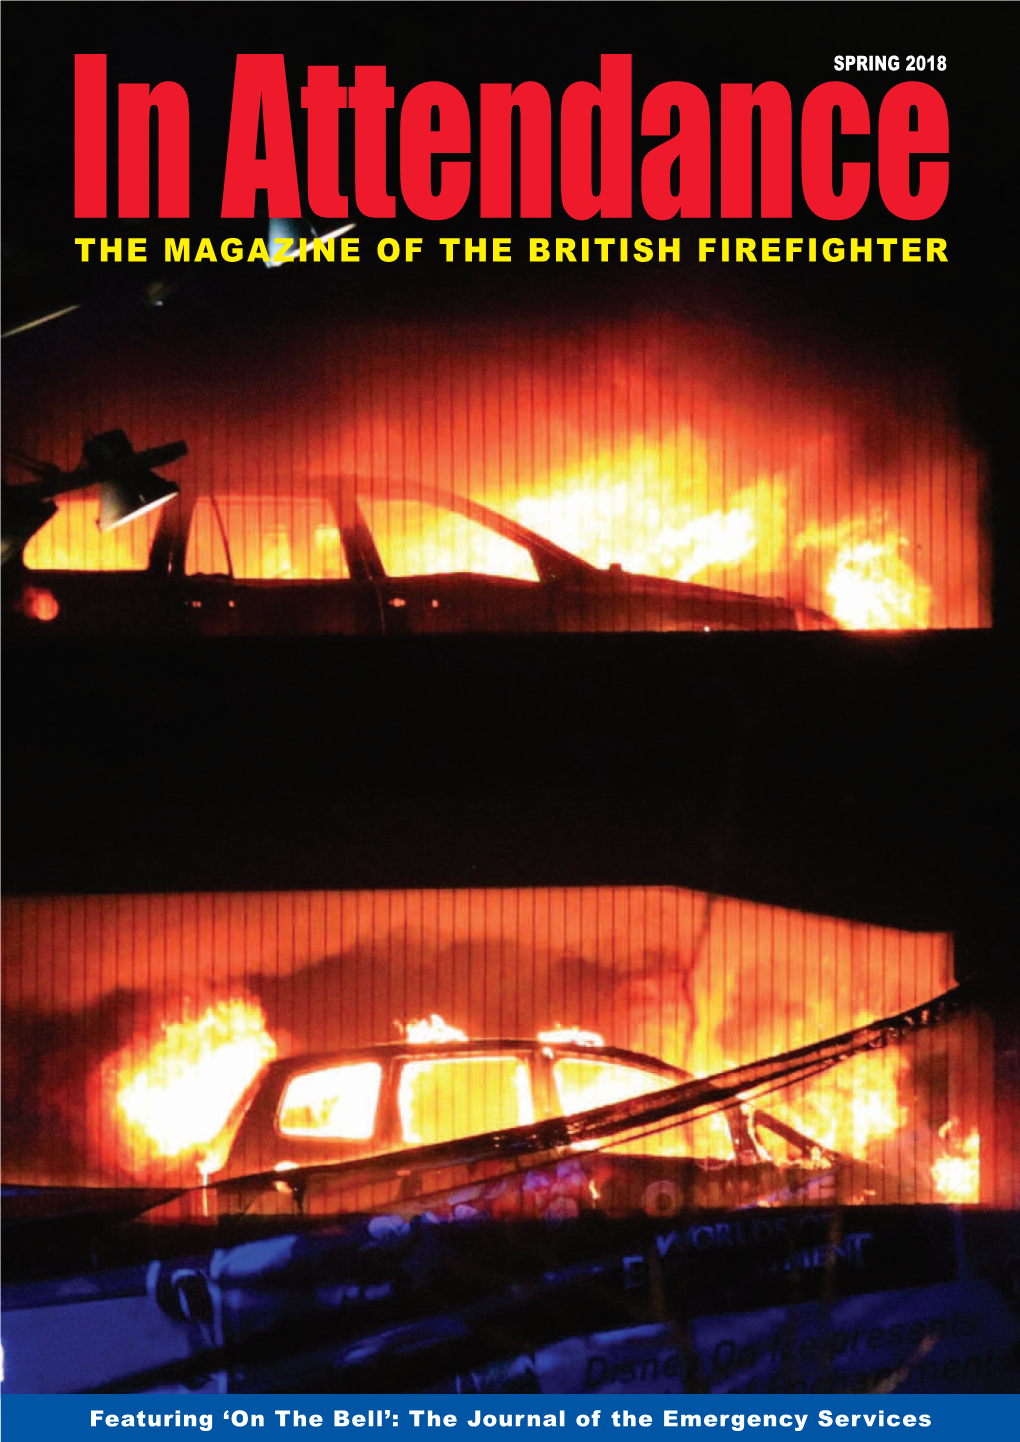 The Magazine of the British Firefighter